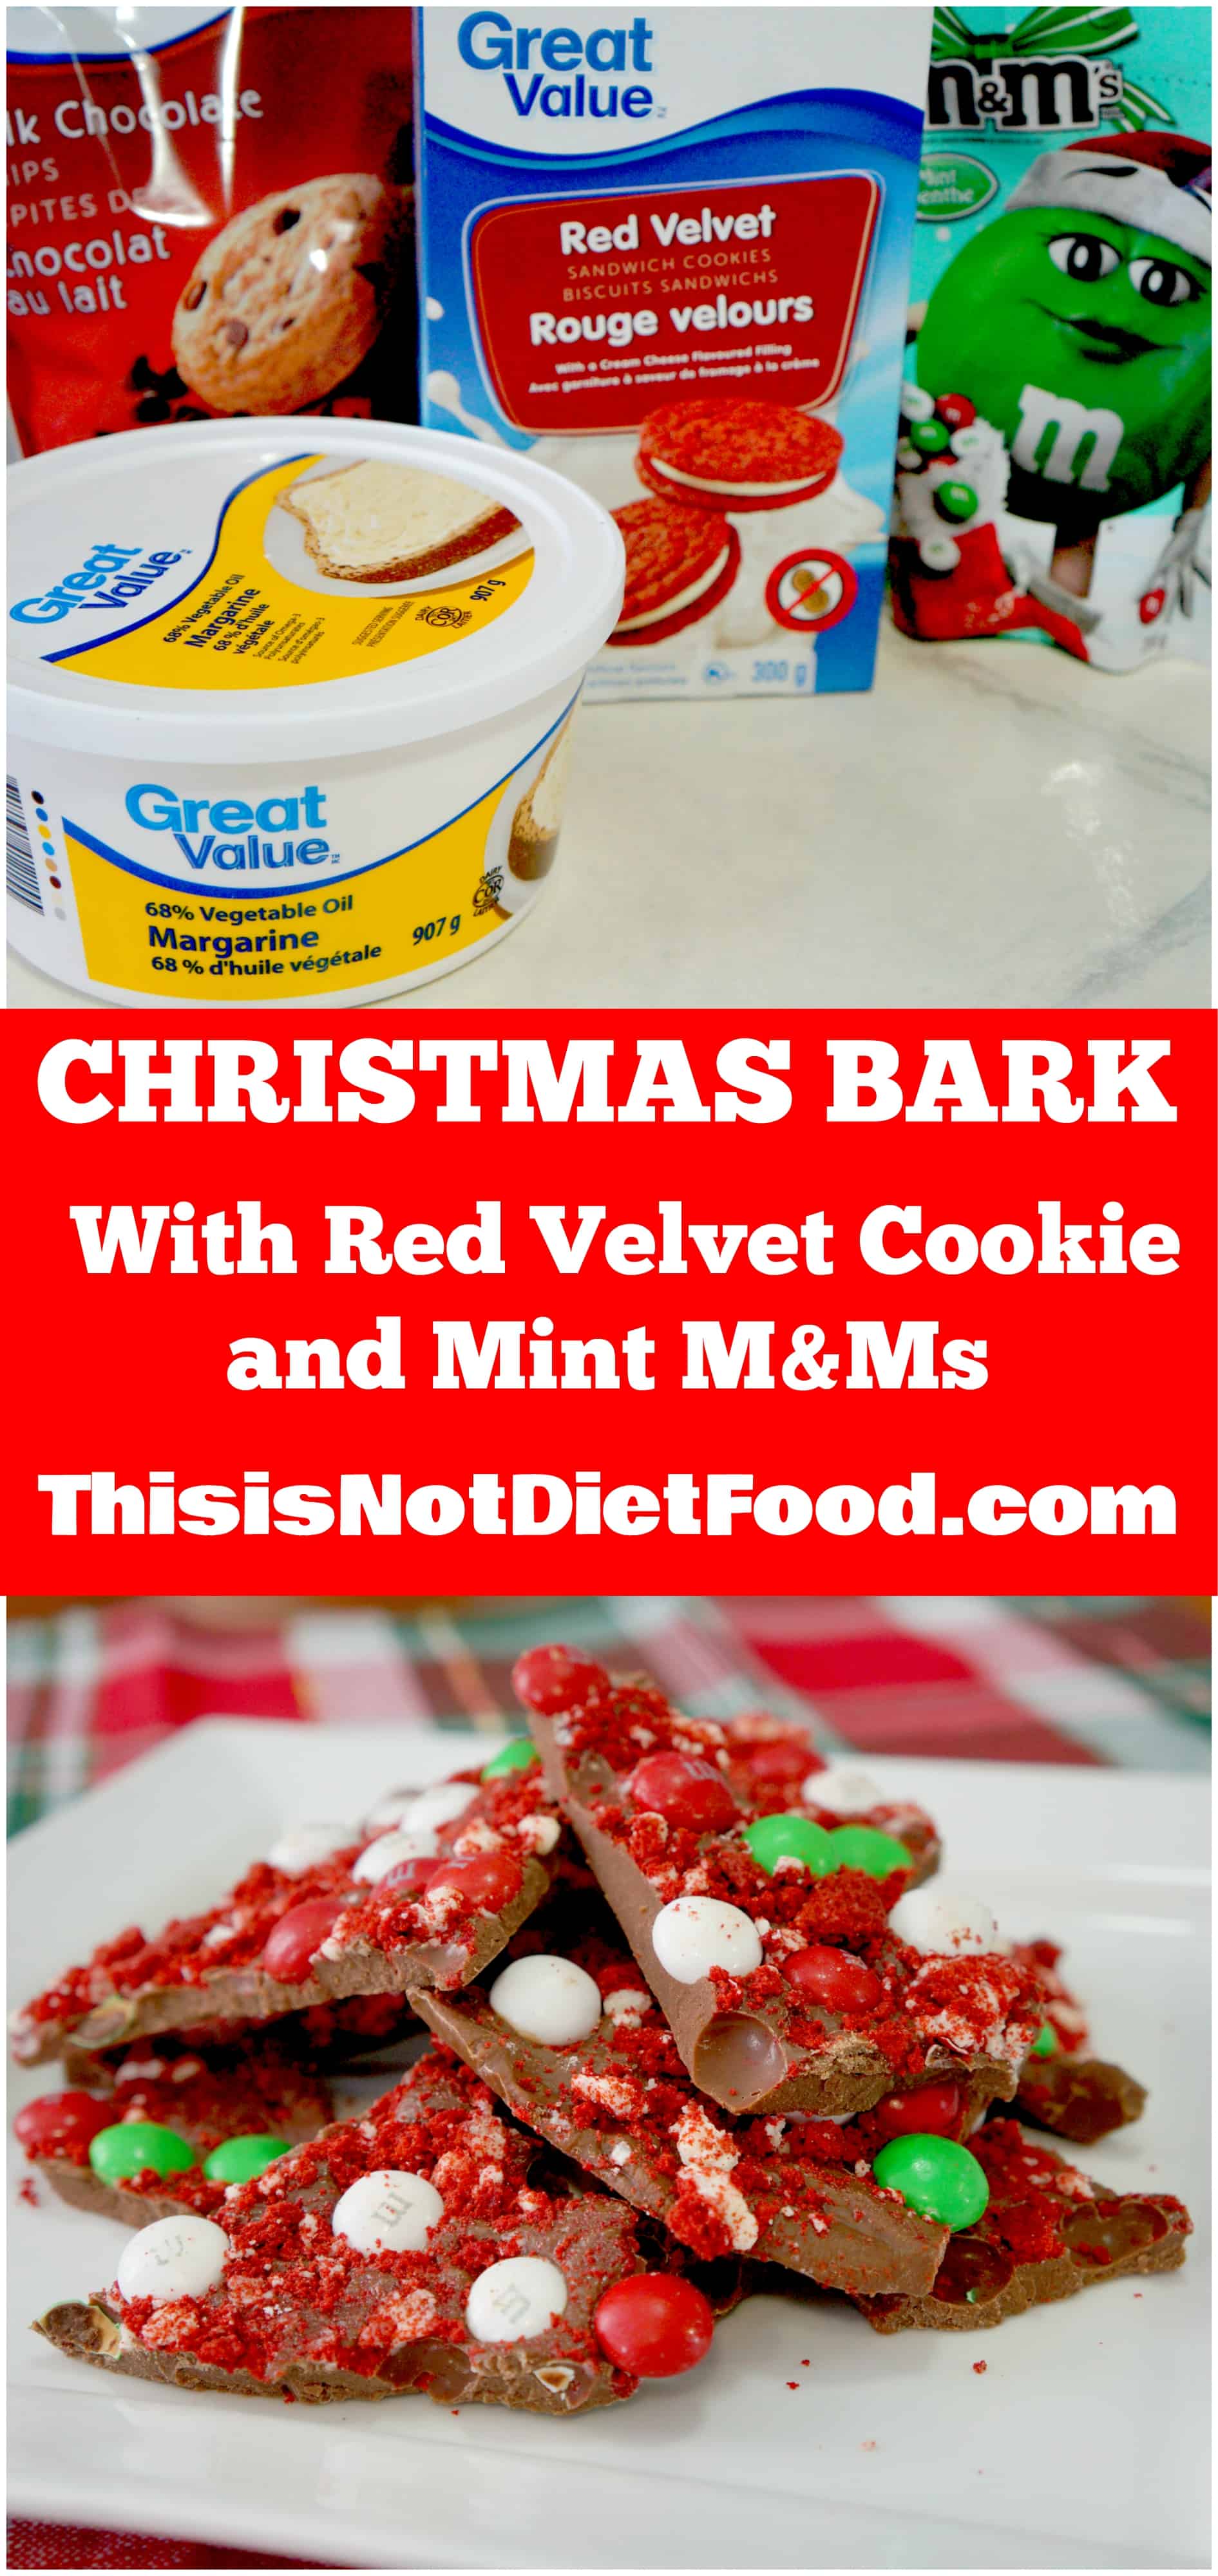 Christmas Bark with Red Velvet Cookie and Mint M&Ms.